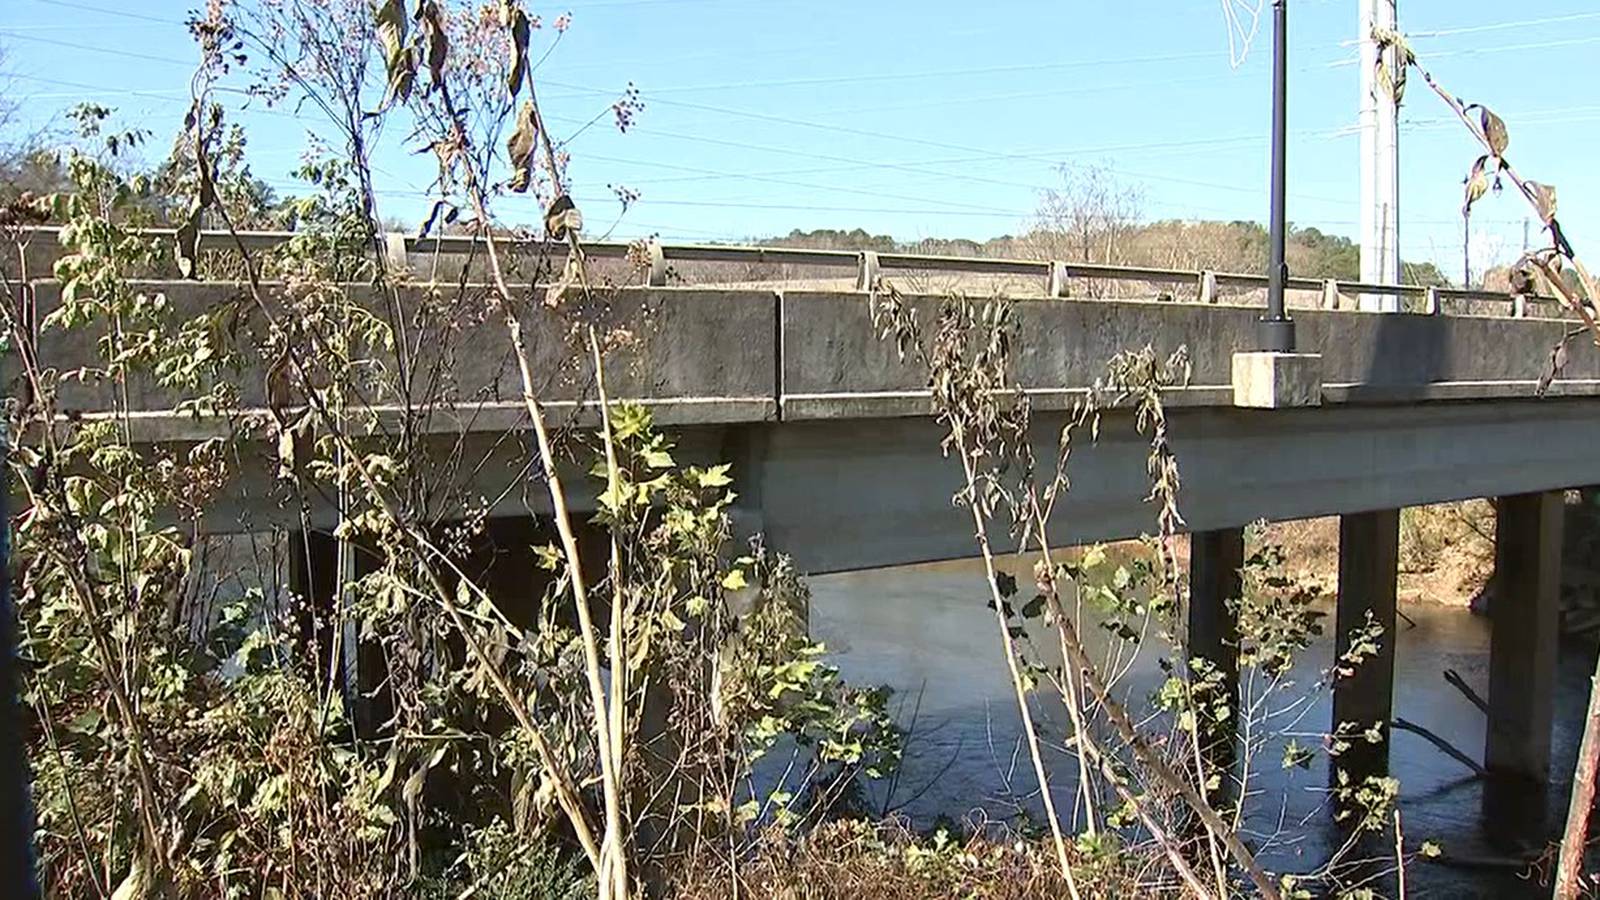 Skeletal remains found near Canton river are 3rd dead body found in